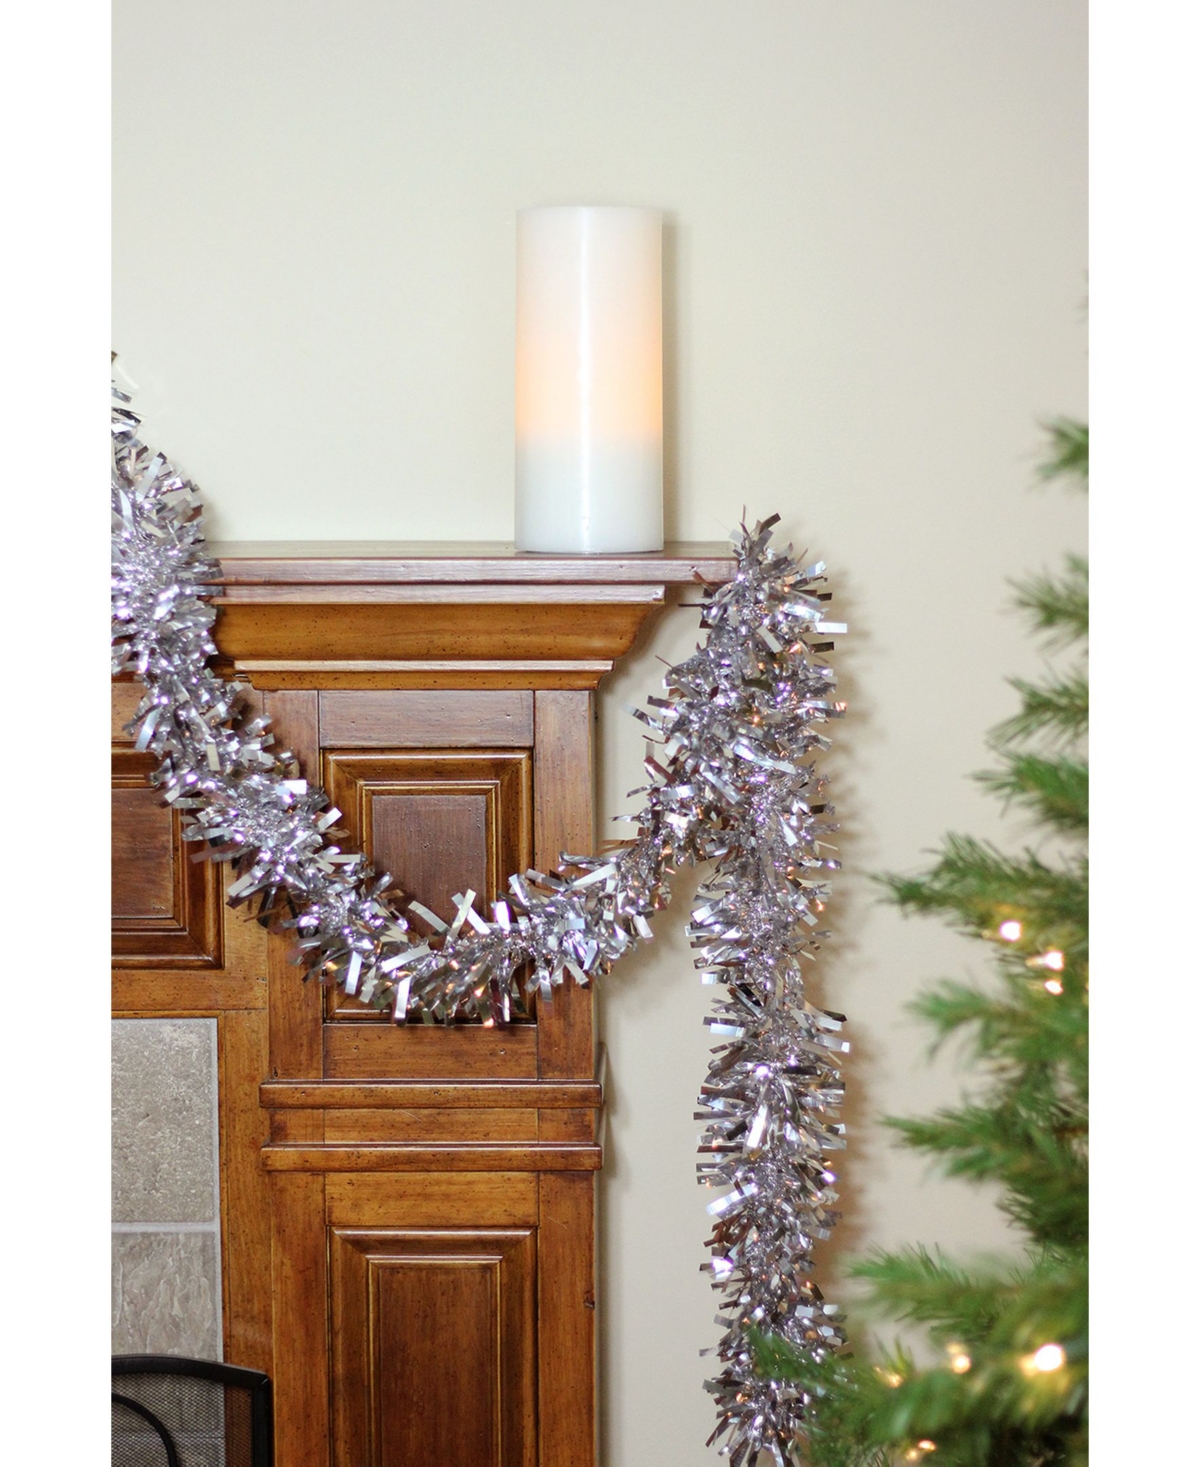 12' x 3 Silver and White Iridescent Tinsel Garland with Silver